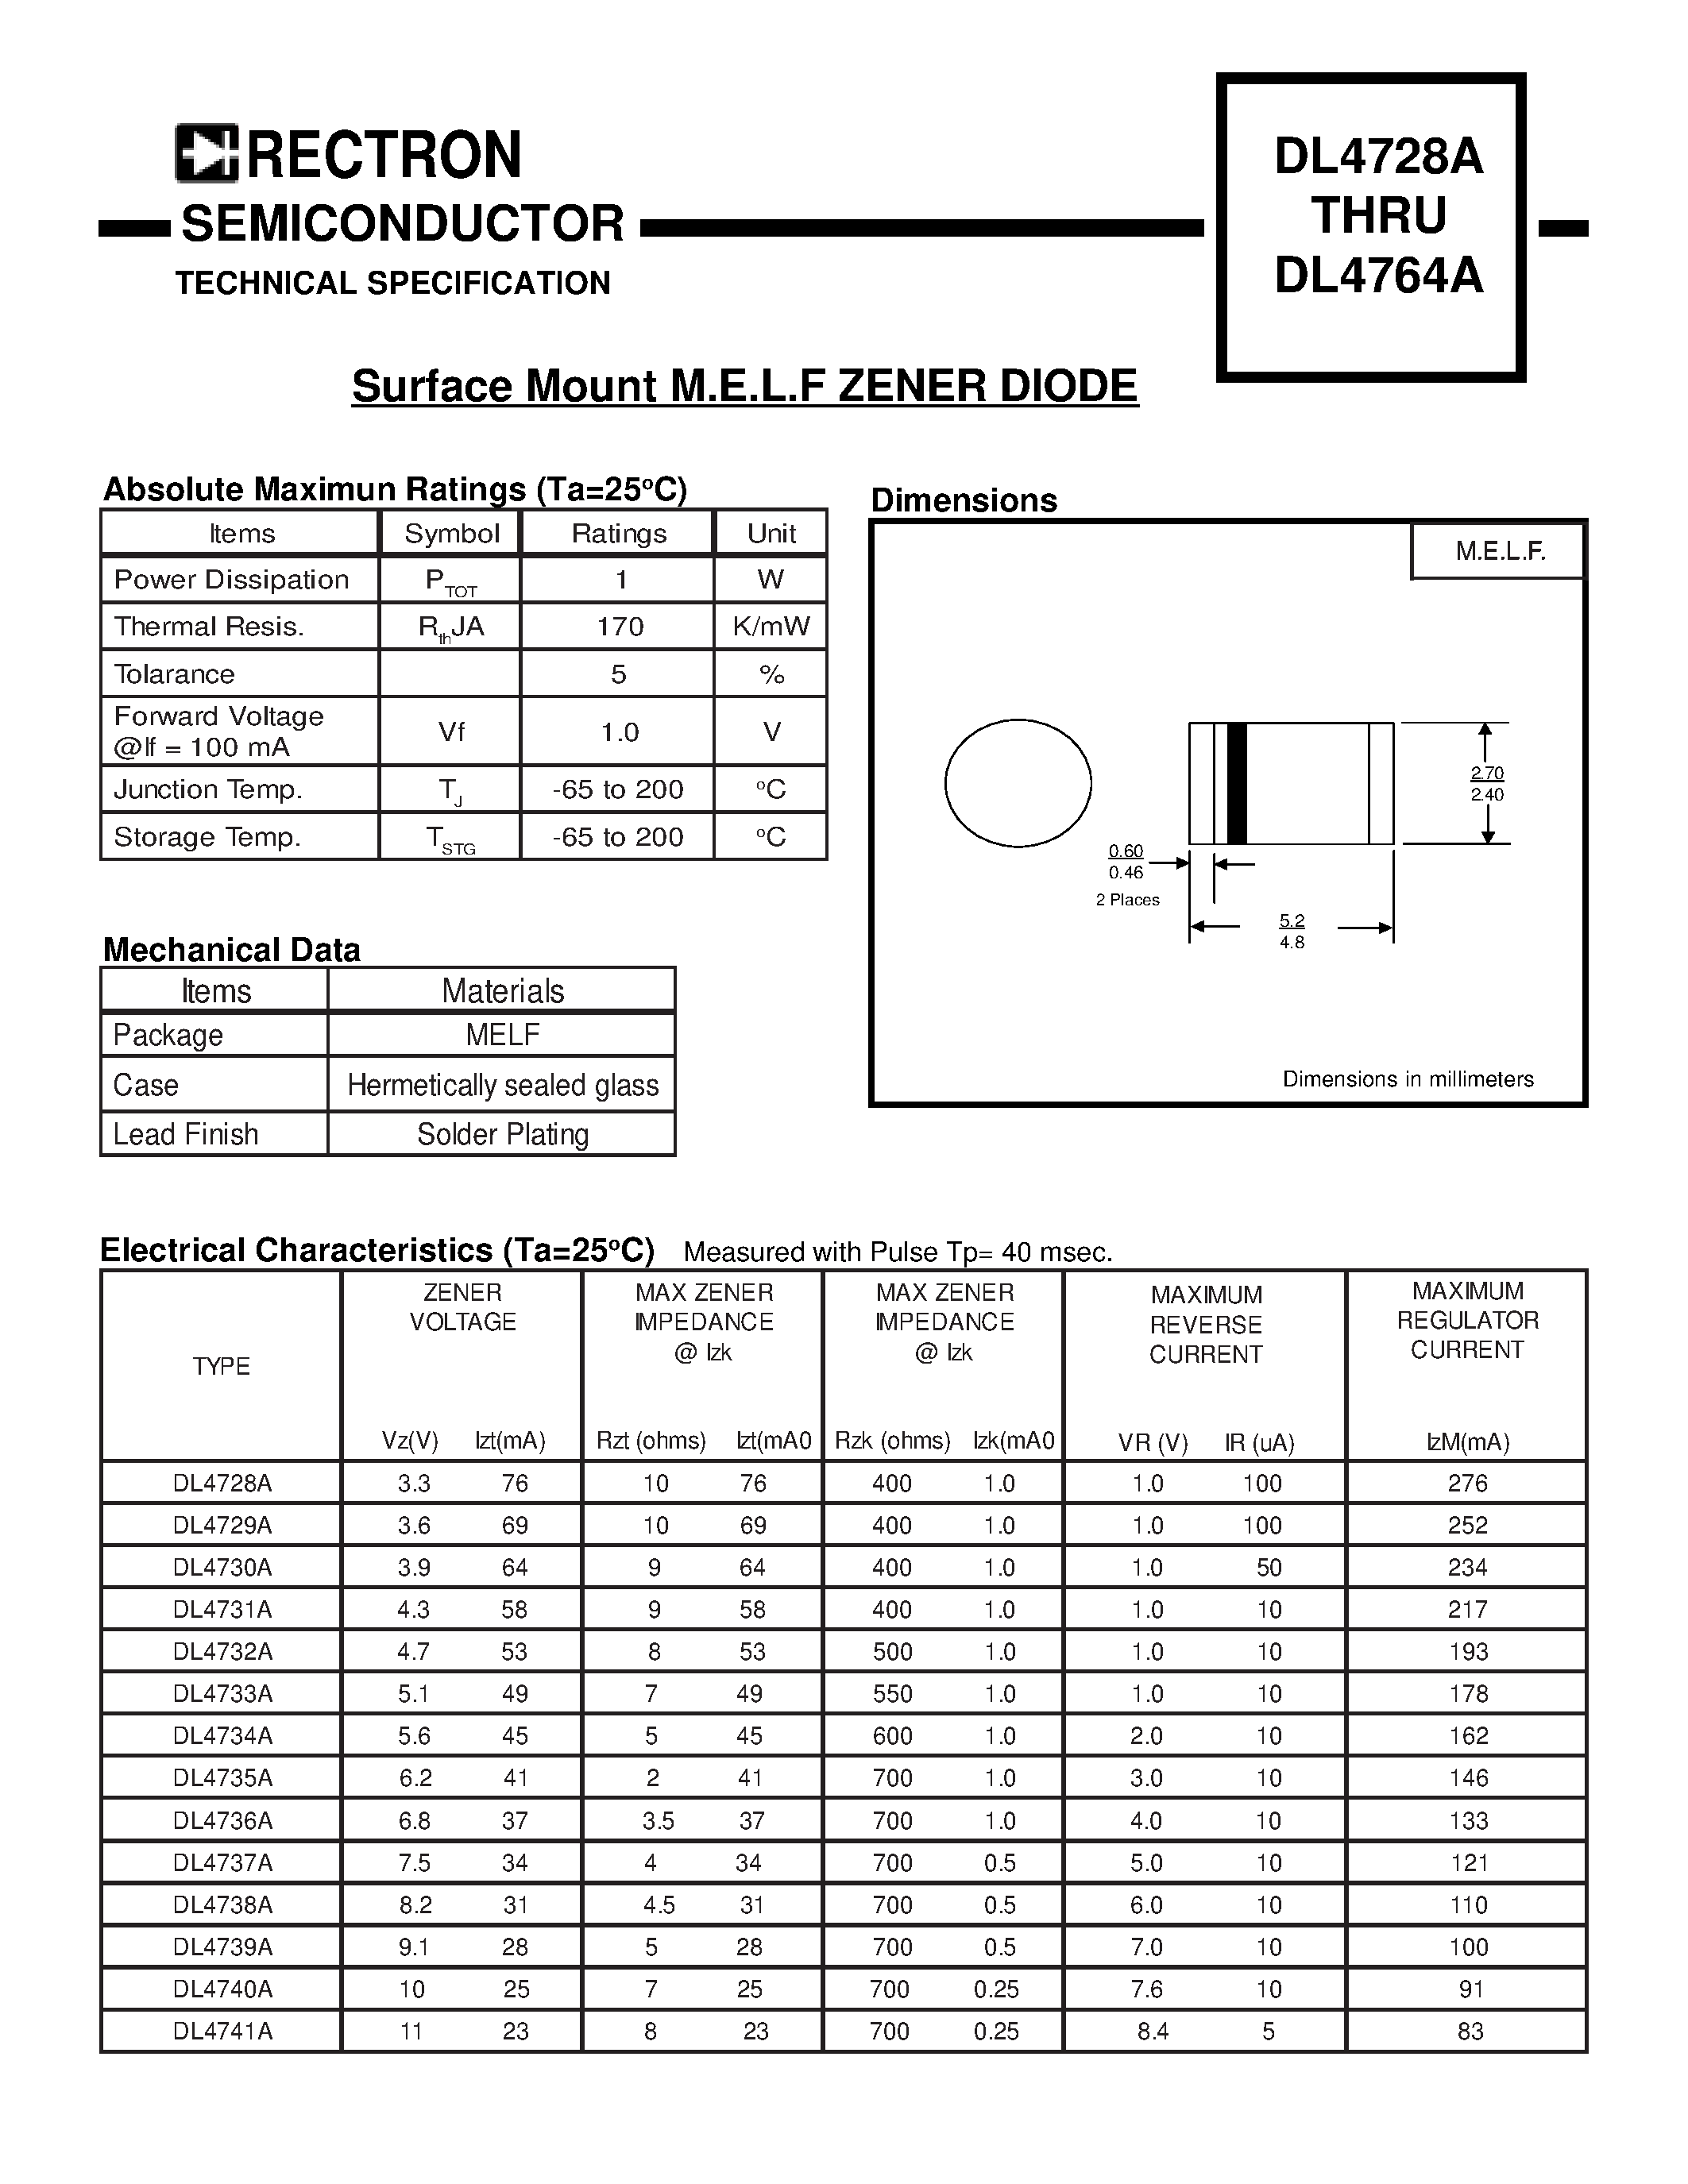 Datasheet DL4758A - Surface Mount M.E.L.F ZENER DIODE page 1